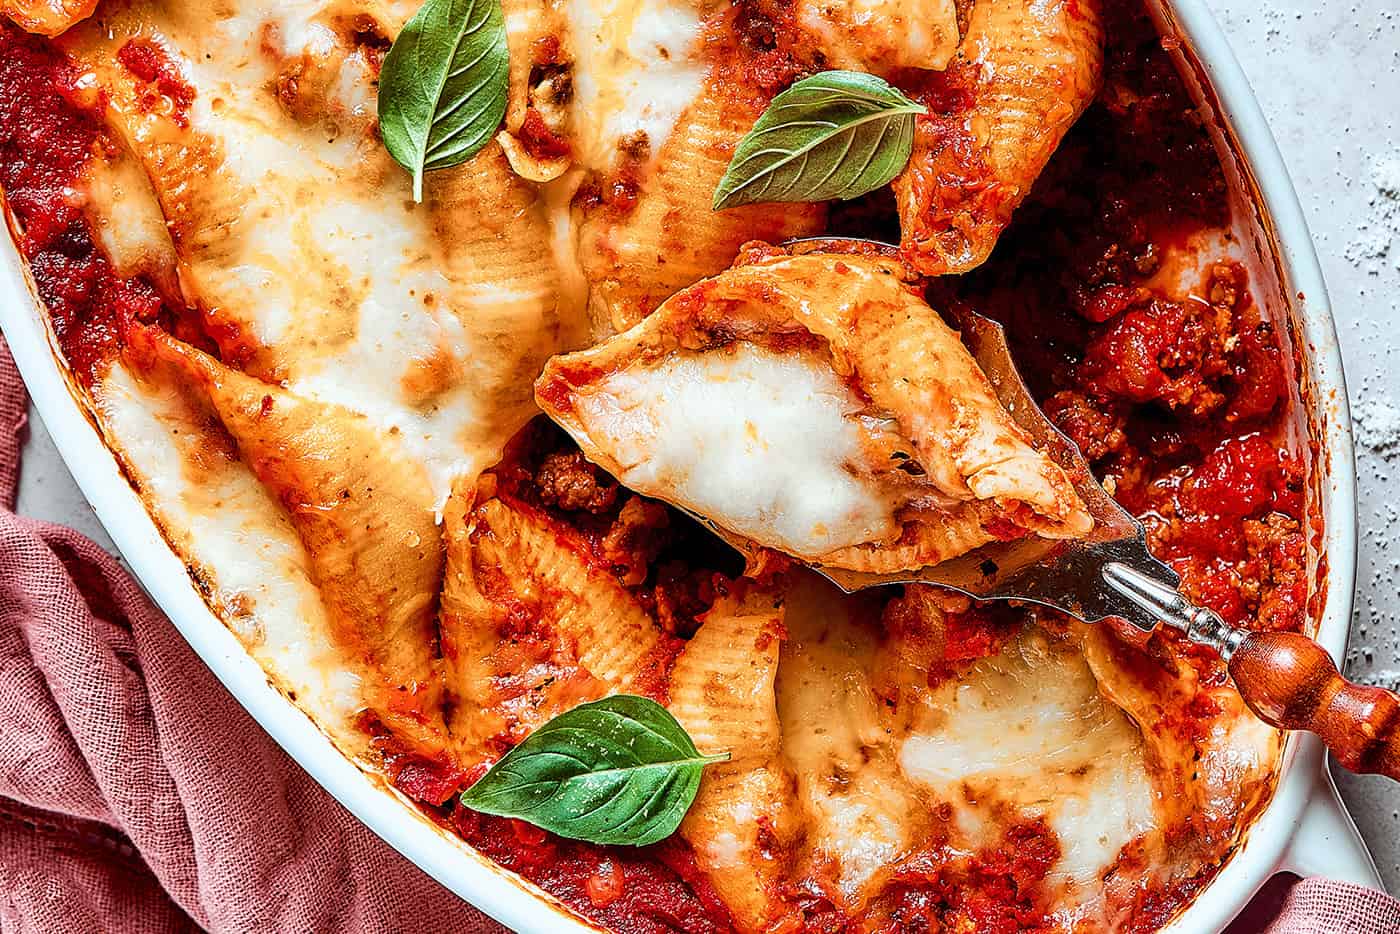 pasta shells stuffed with meat and cheese in a baking dish